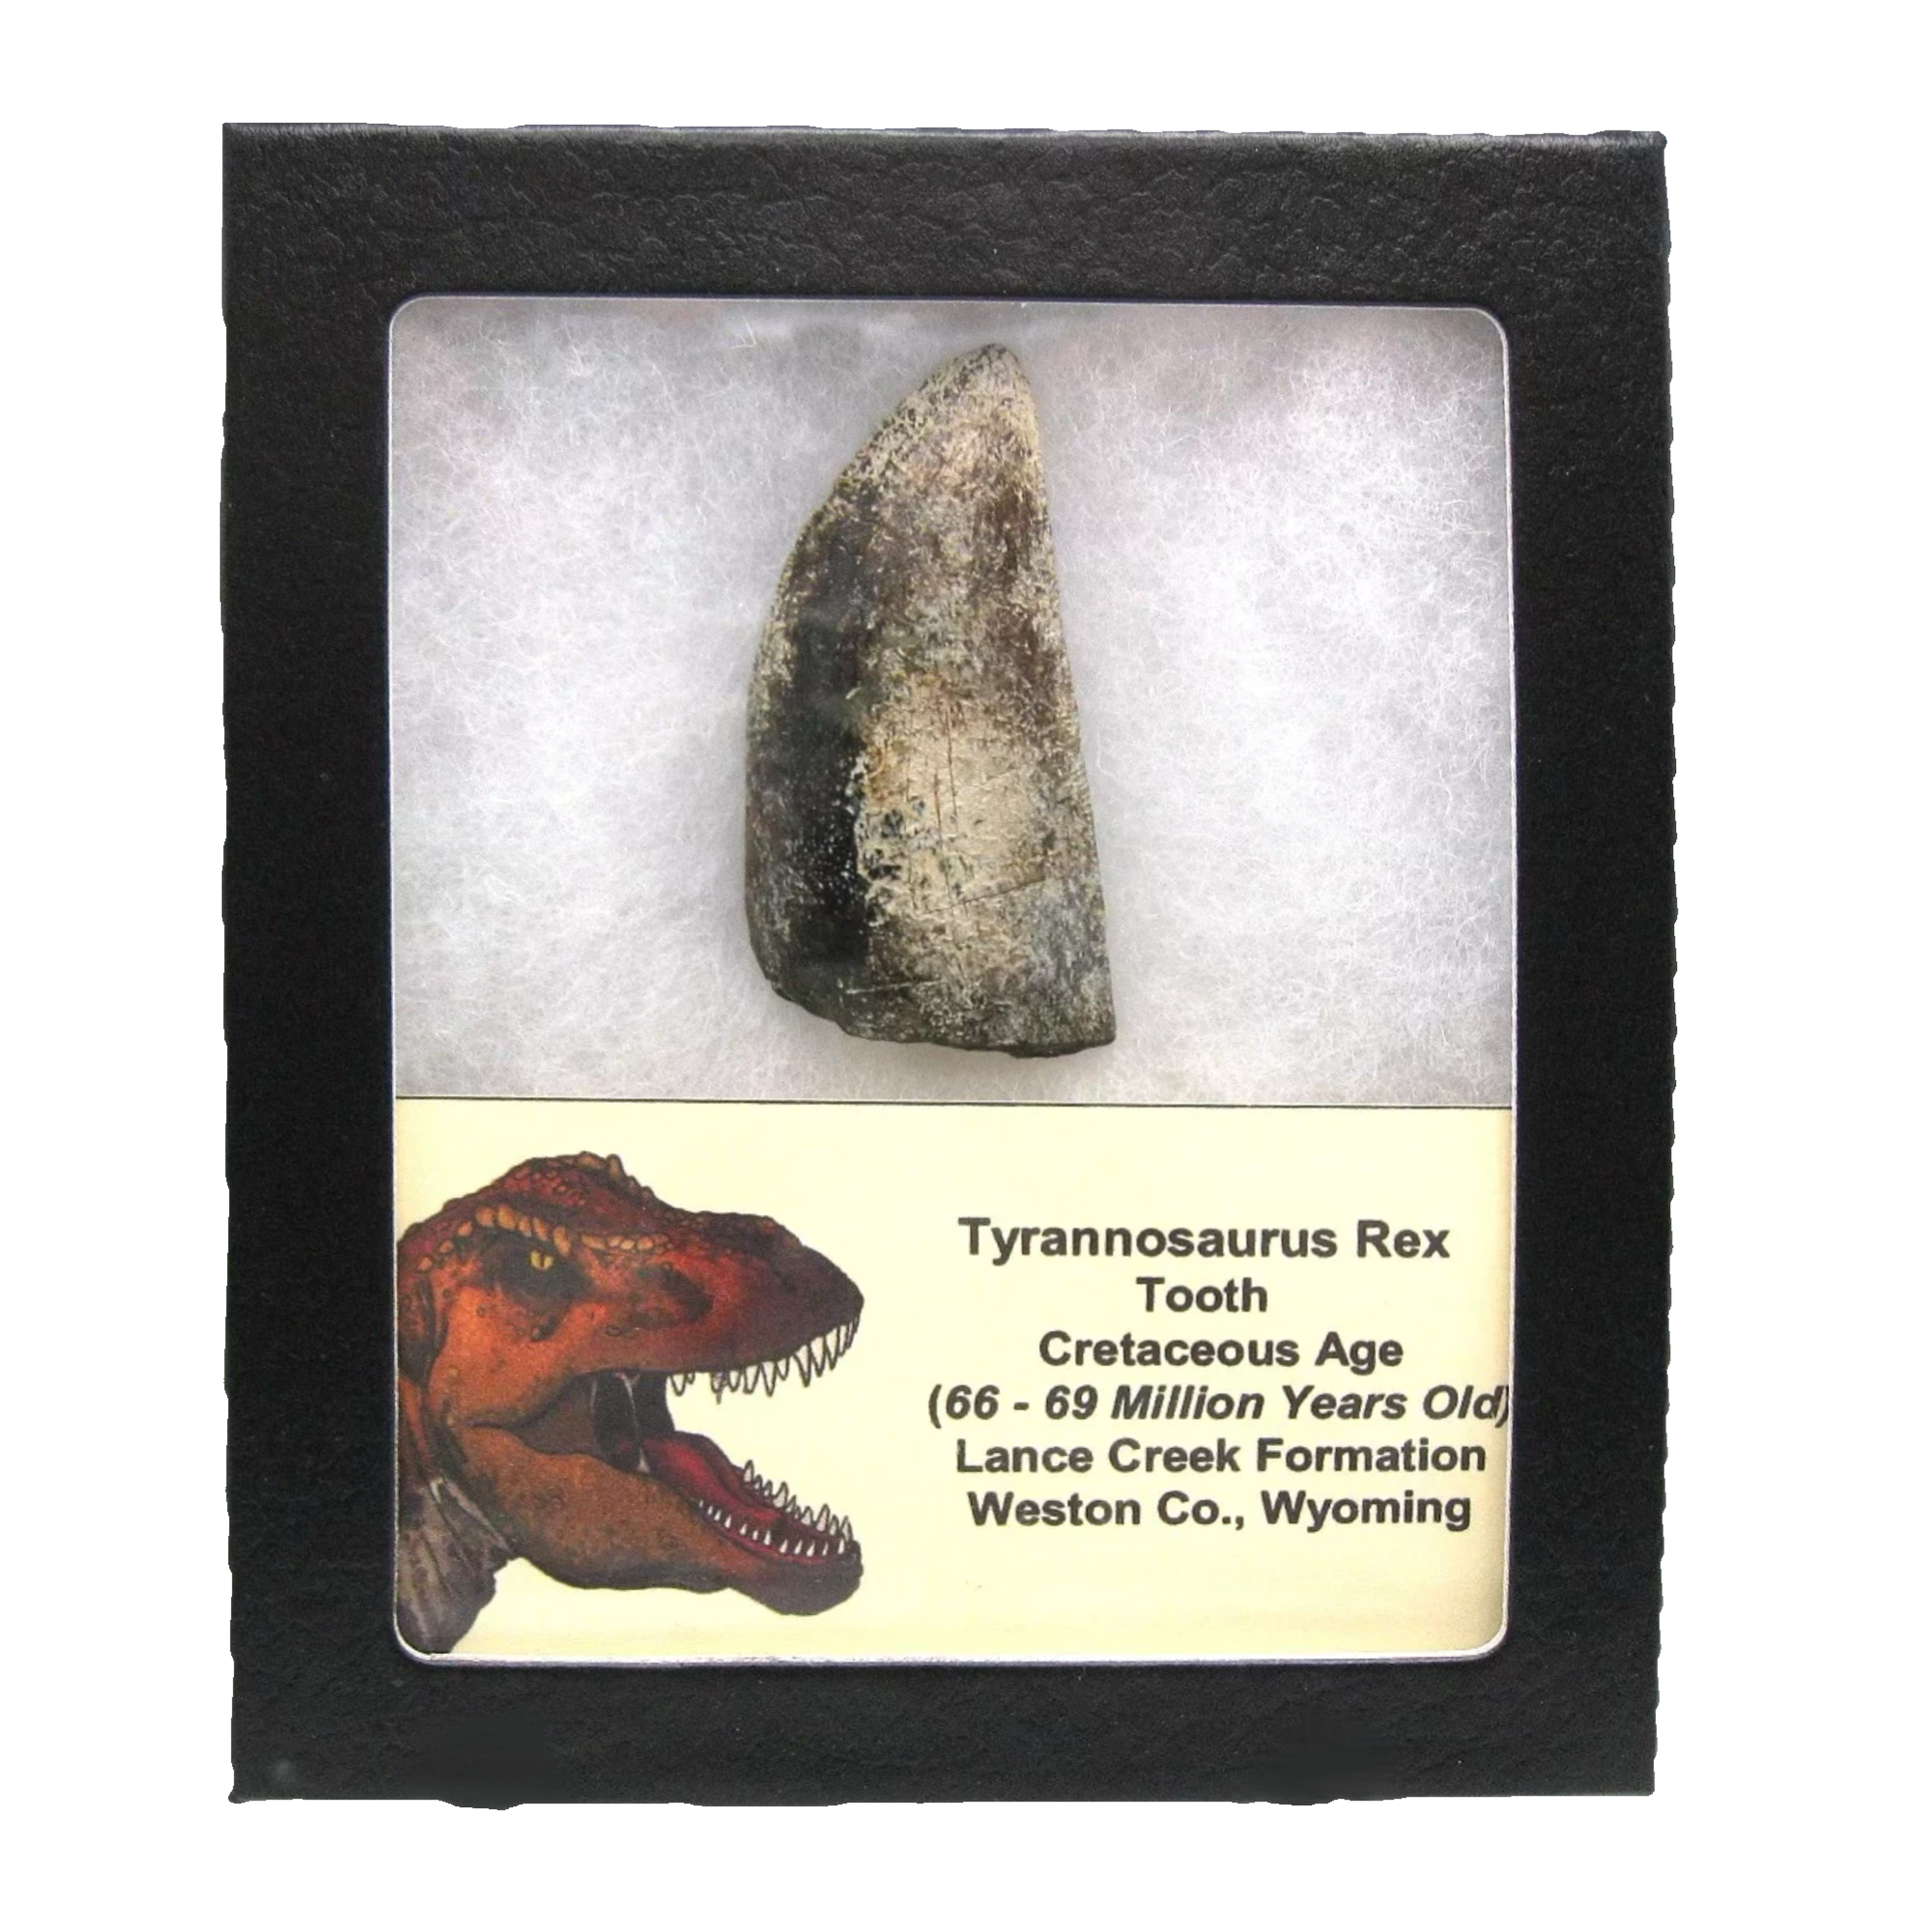 This incredible Tyrannosaurus rex tooth from Wyoming measures 2 3/8 inches long has a beautiful serrations and is 100% original